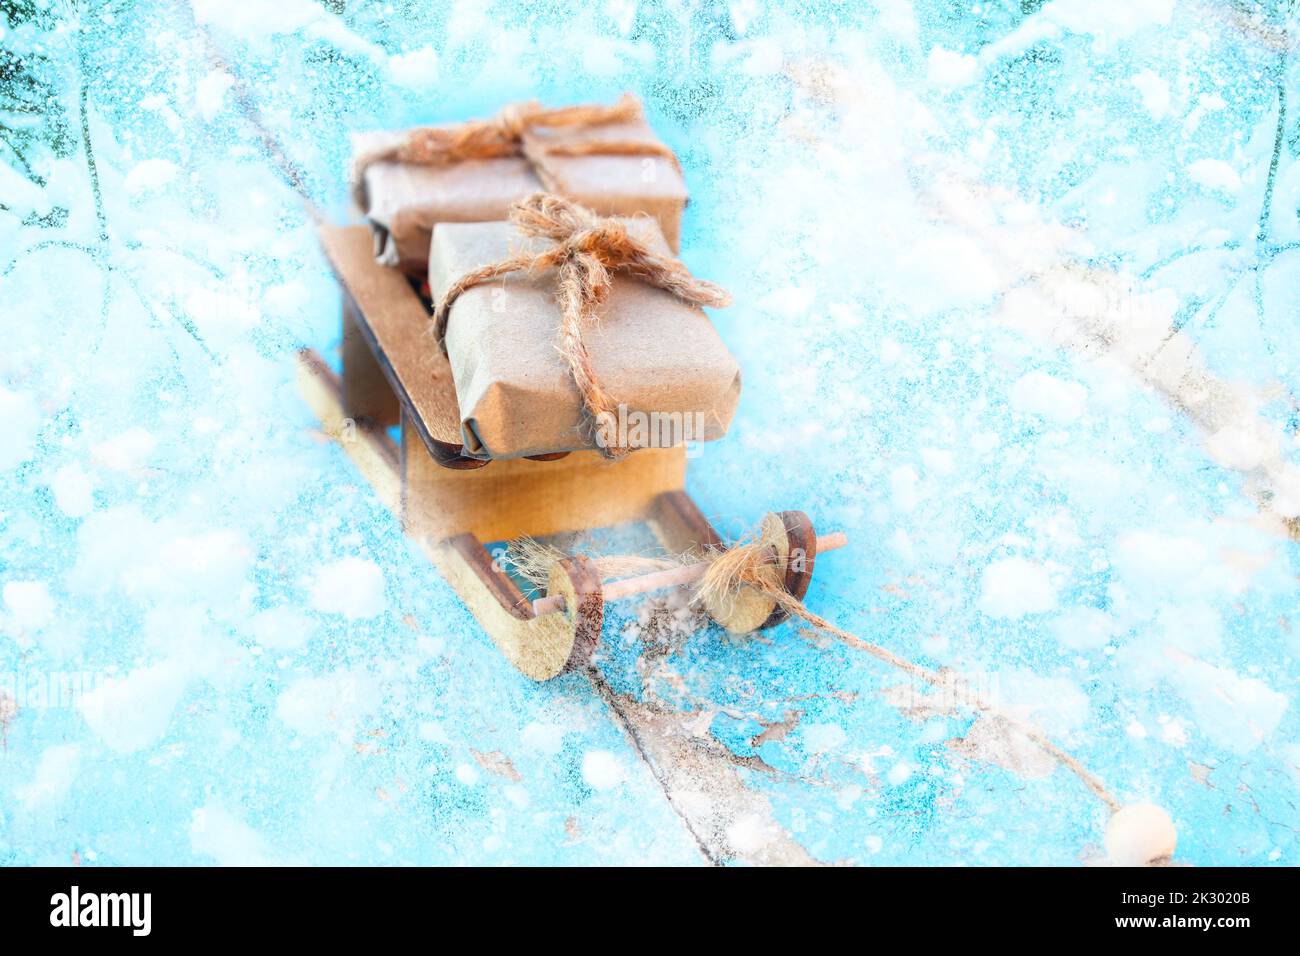 Defocus Xmas gift composition. Wrapped craft vintage gift boxes lying wooden toy sled on blue snowy background. Present box in craft paper. Holiday co Stock Photo